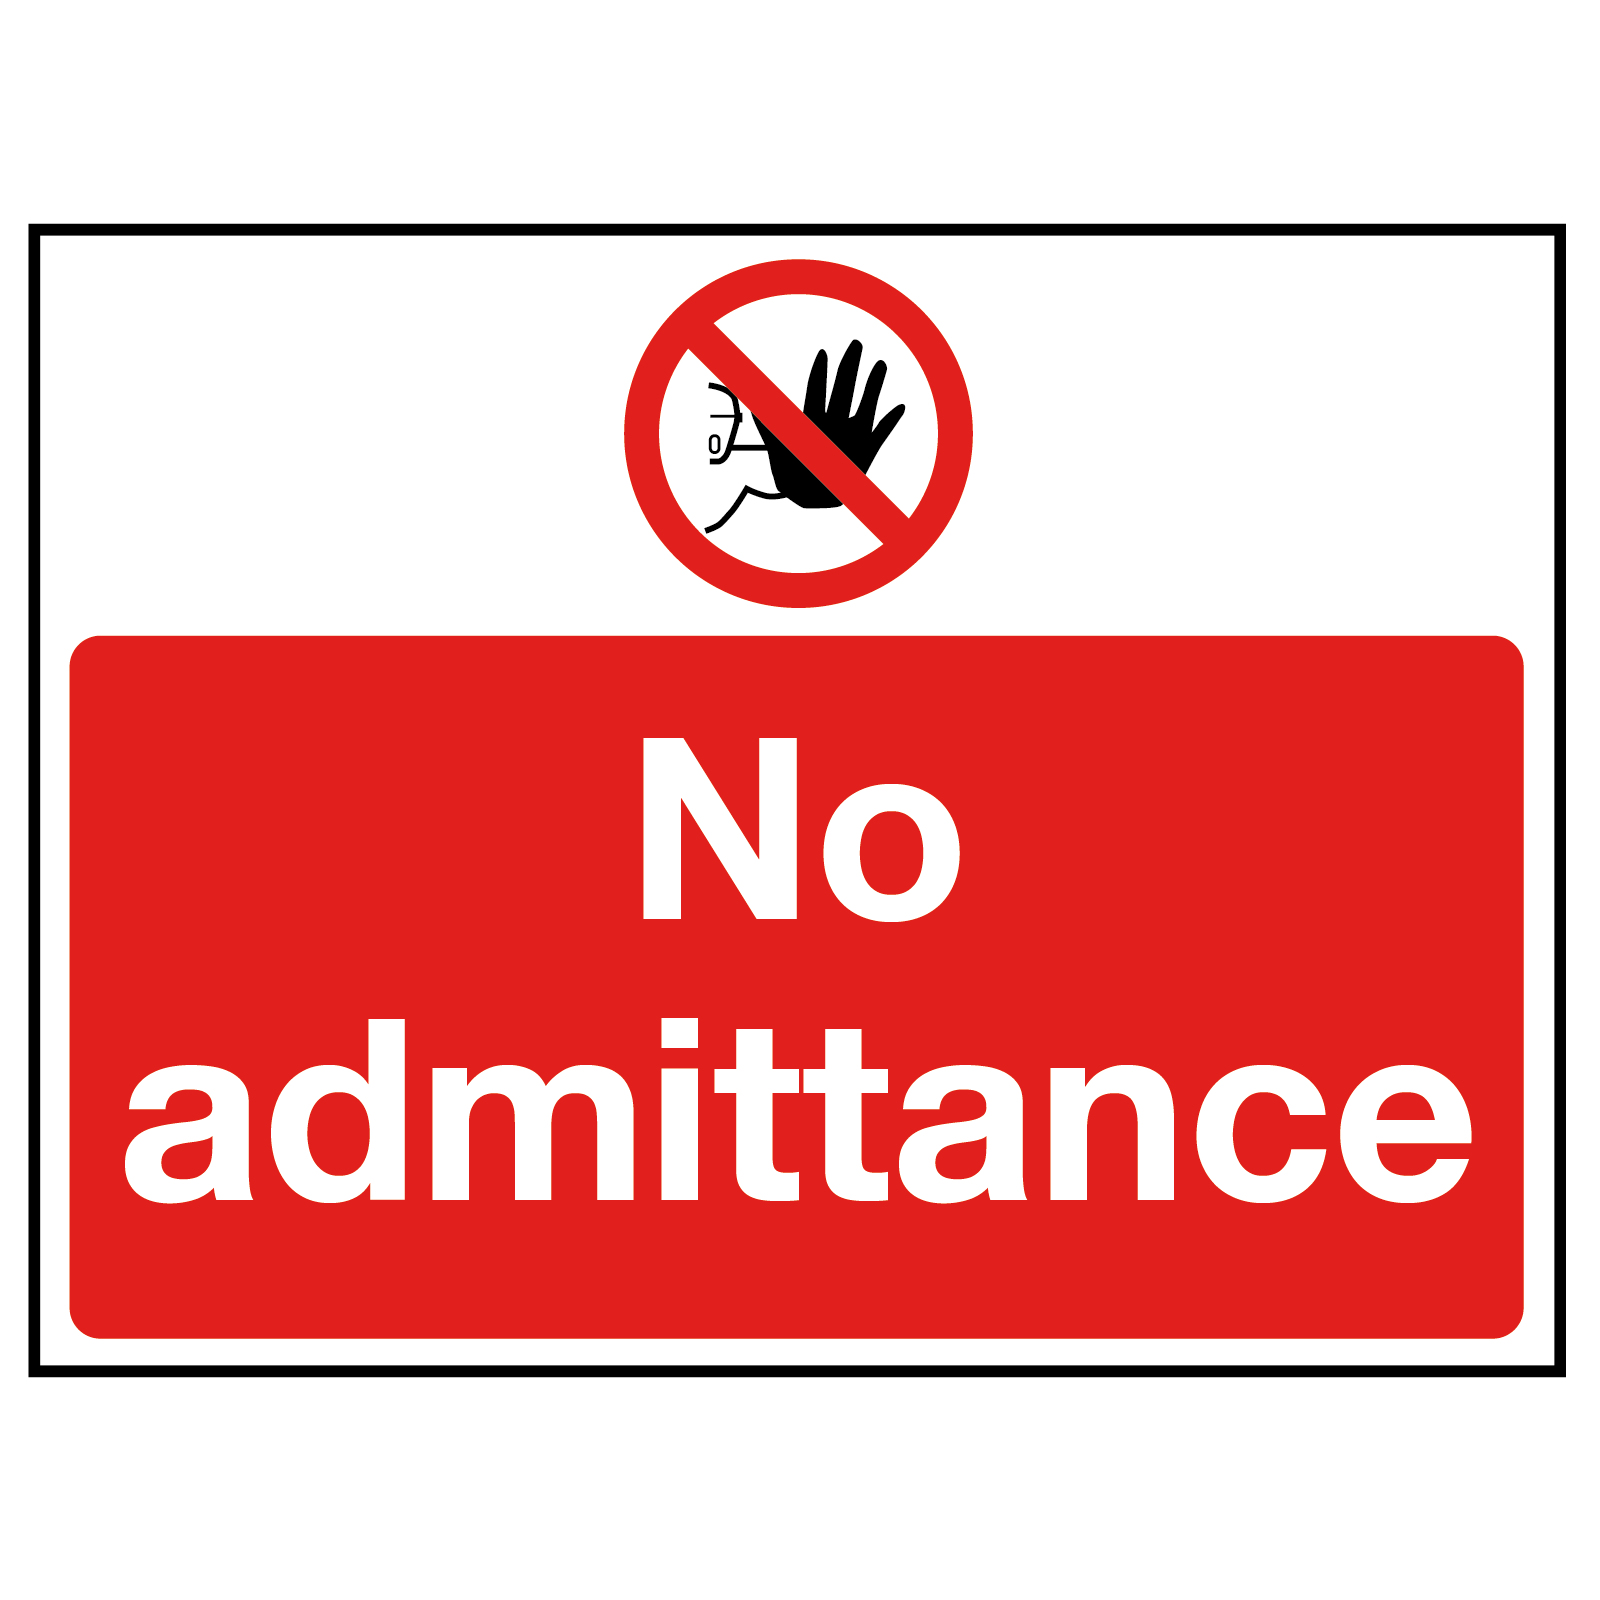 No Admittance with hand stop symbol sign